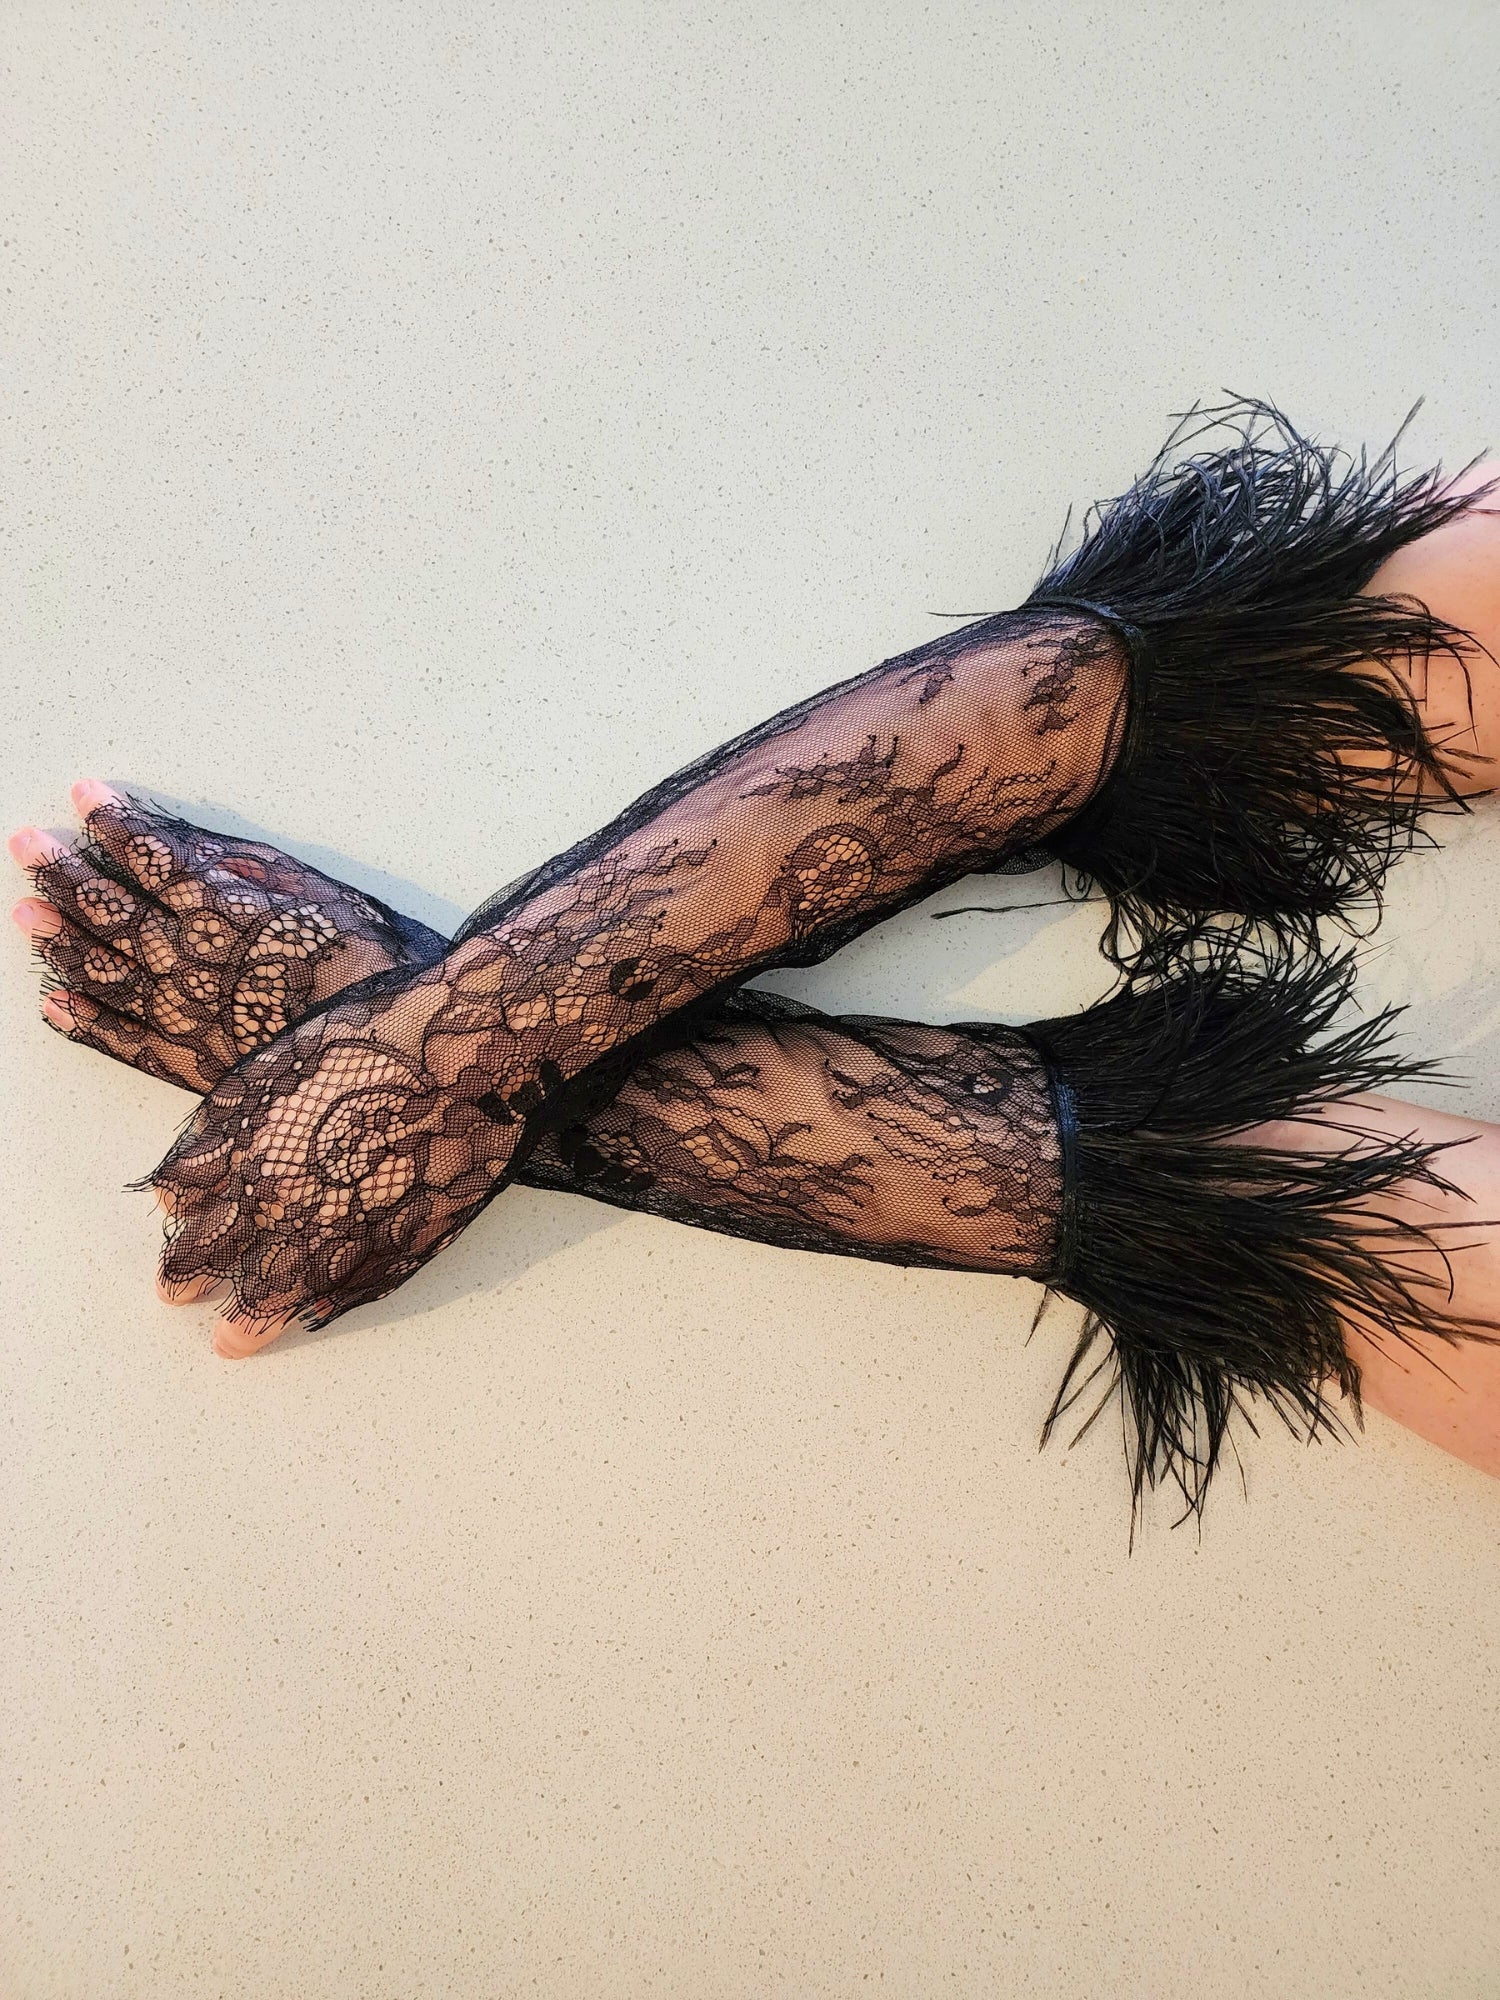 The Feather Gloves - Introducing our exquisite Feather Glove– the ultimate statement accessory designed to elevate your wardrobe effortlessly. Crafted from the finest, softest lace and delicately adorned with luxurious feather trim, these fingerless glove